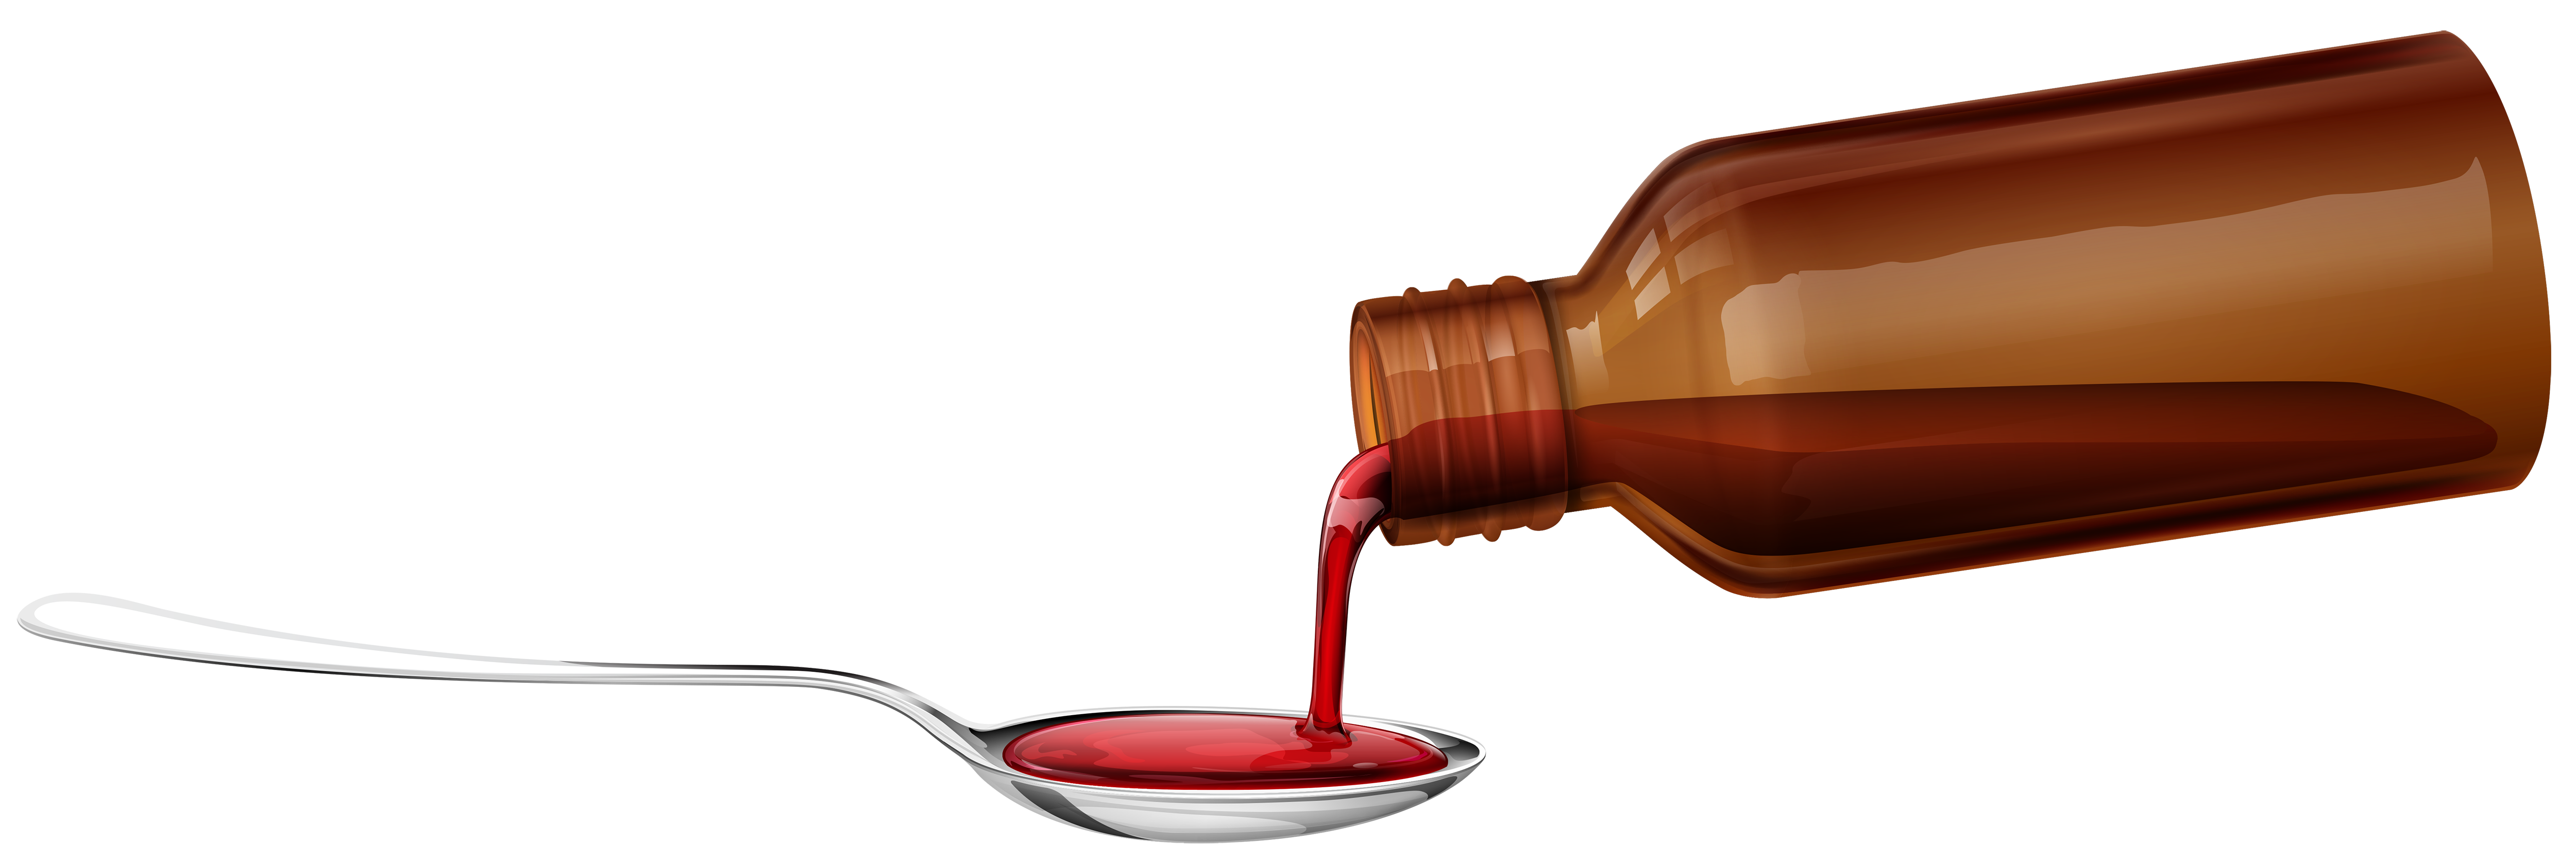 spoon, cough syrup clip art cliparts #29456